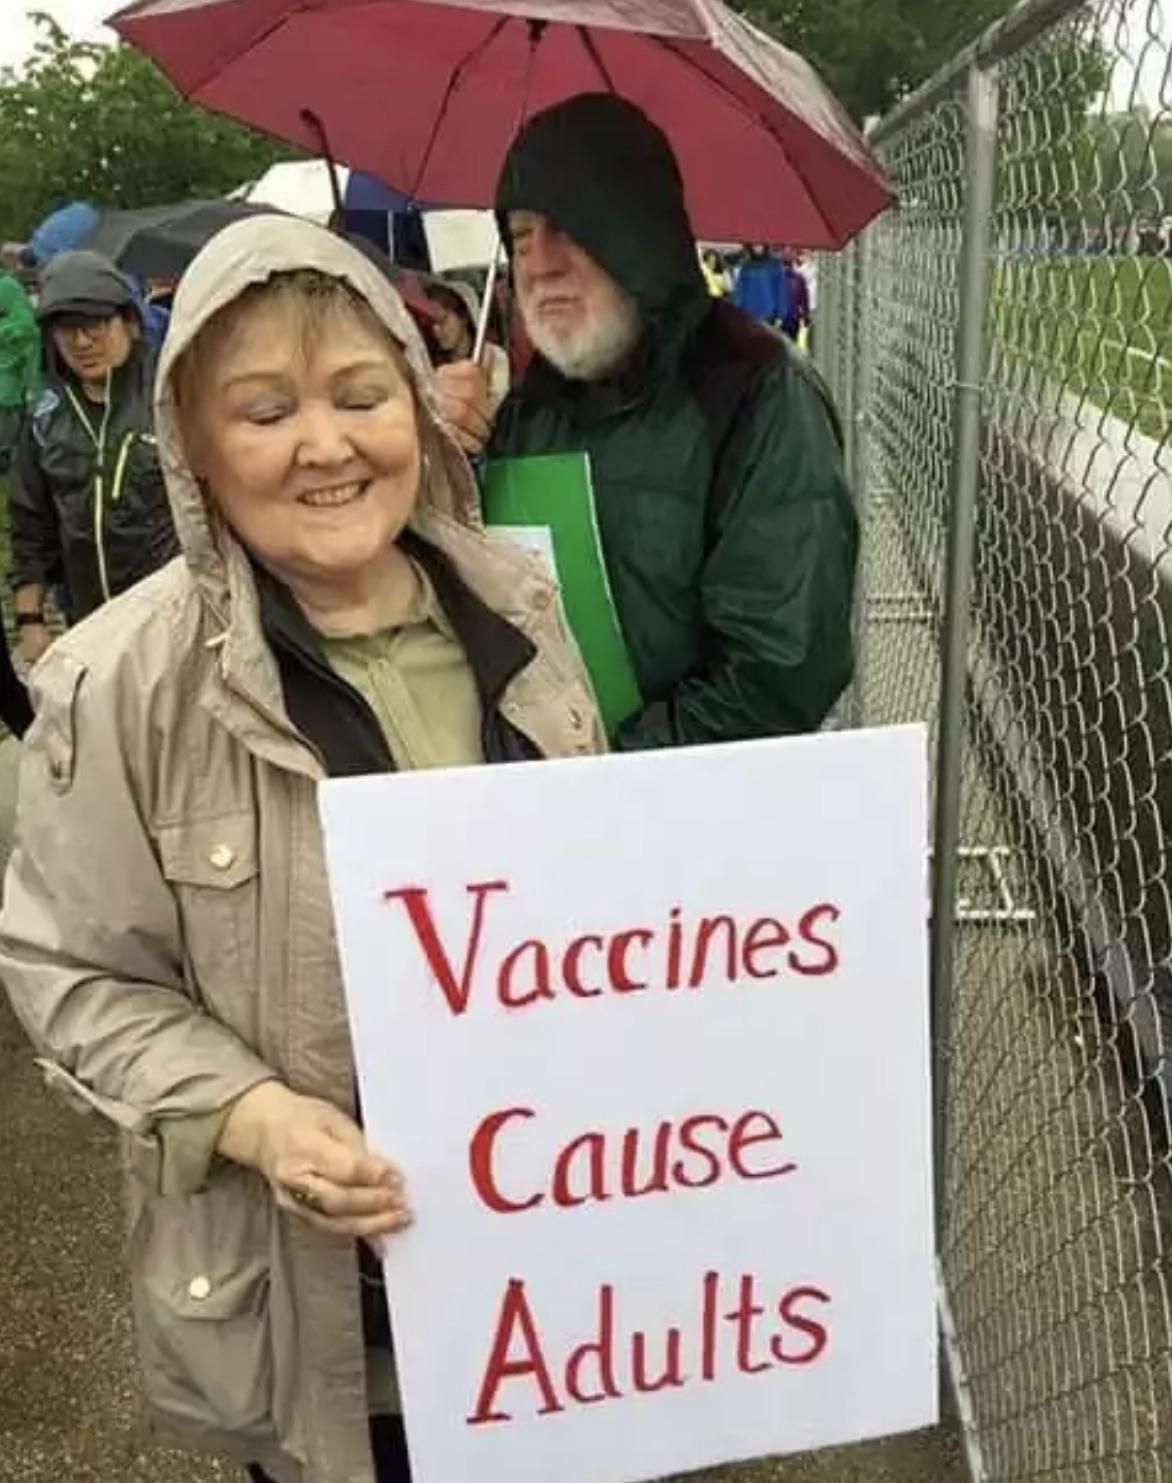 Is that what anti-vaxers are so afraid of?